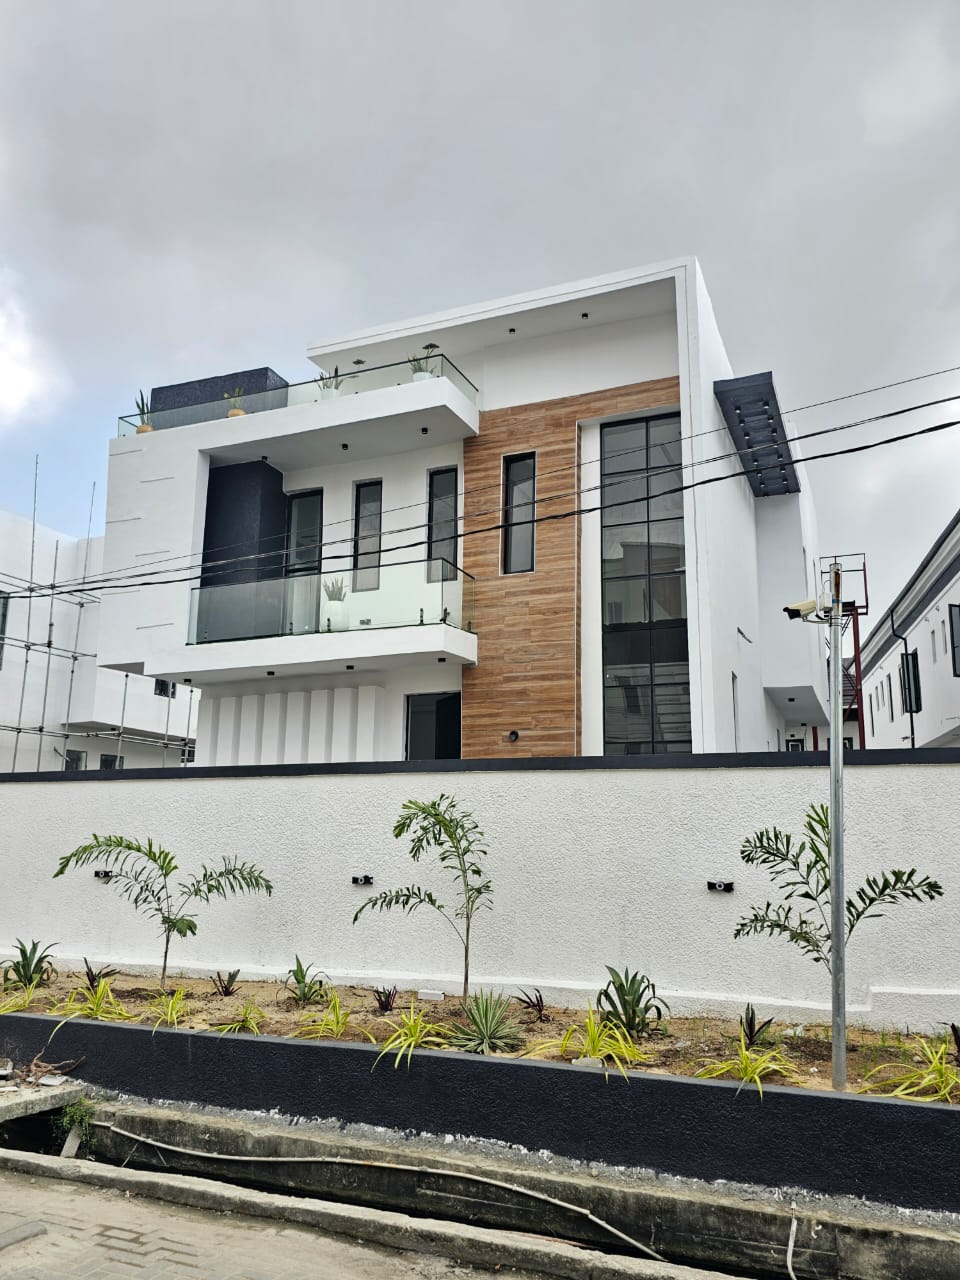 4 BEDROOM FULLY DETACHED DUPLEX AT CHEVRON LEKKI WITH SWIMMING POOL  FOR SALE